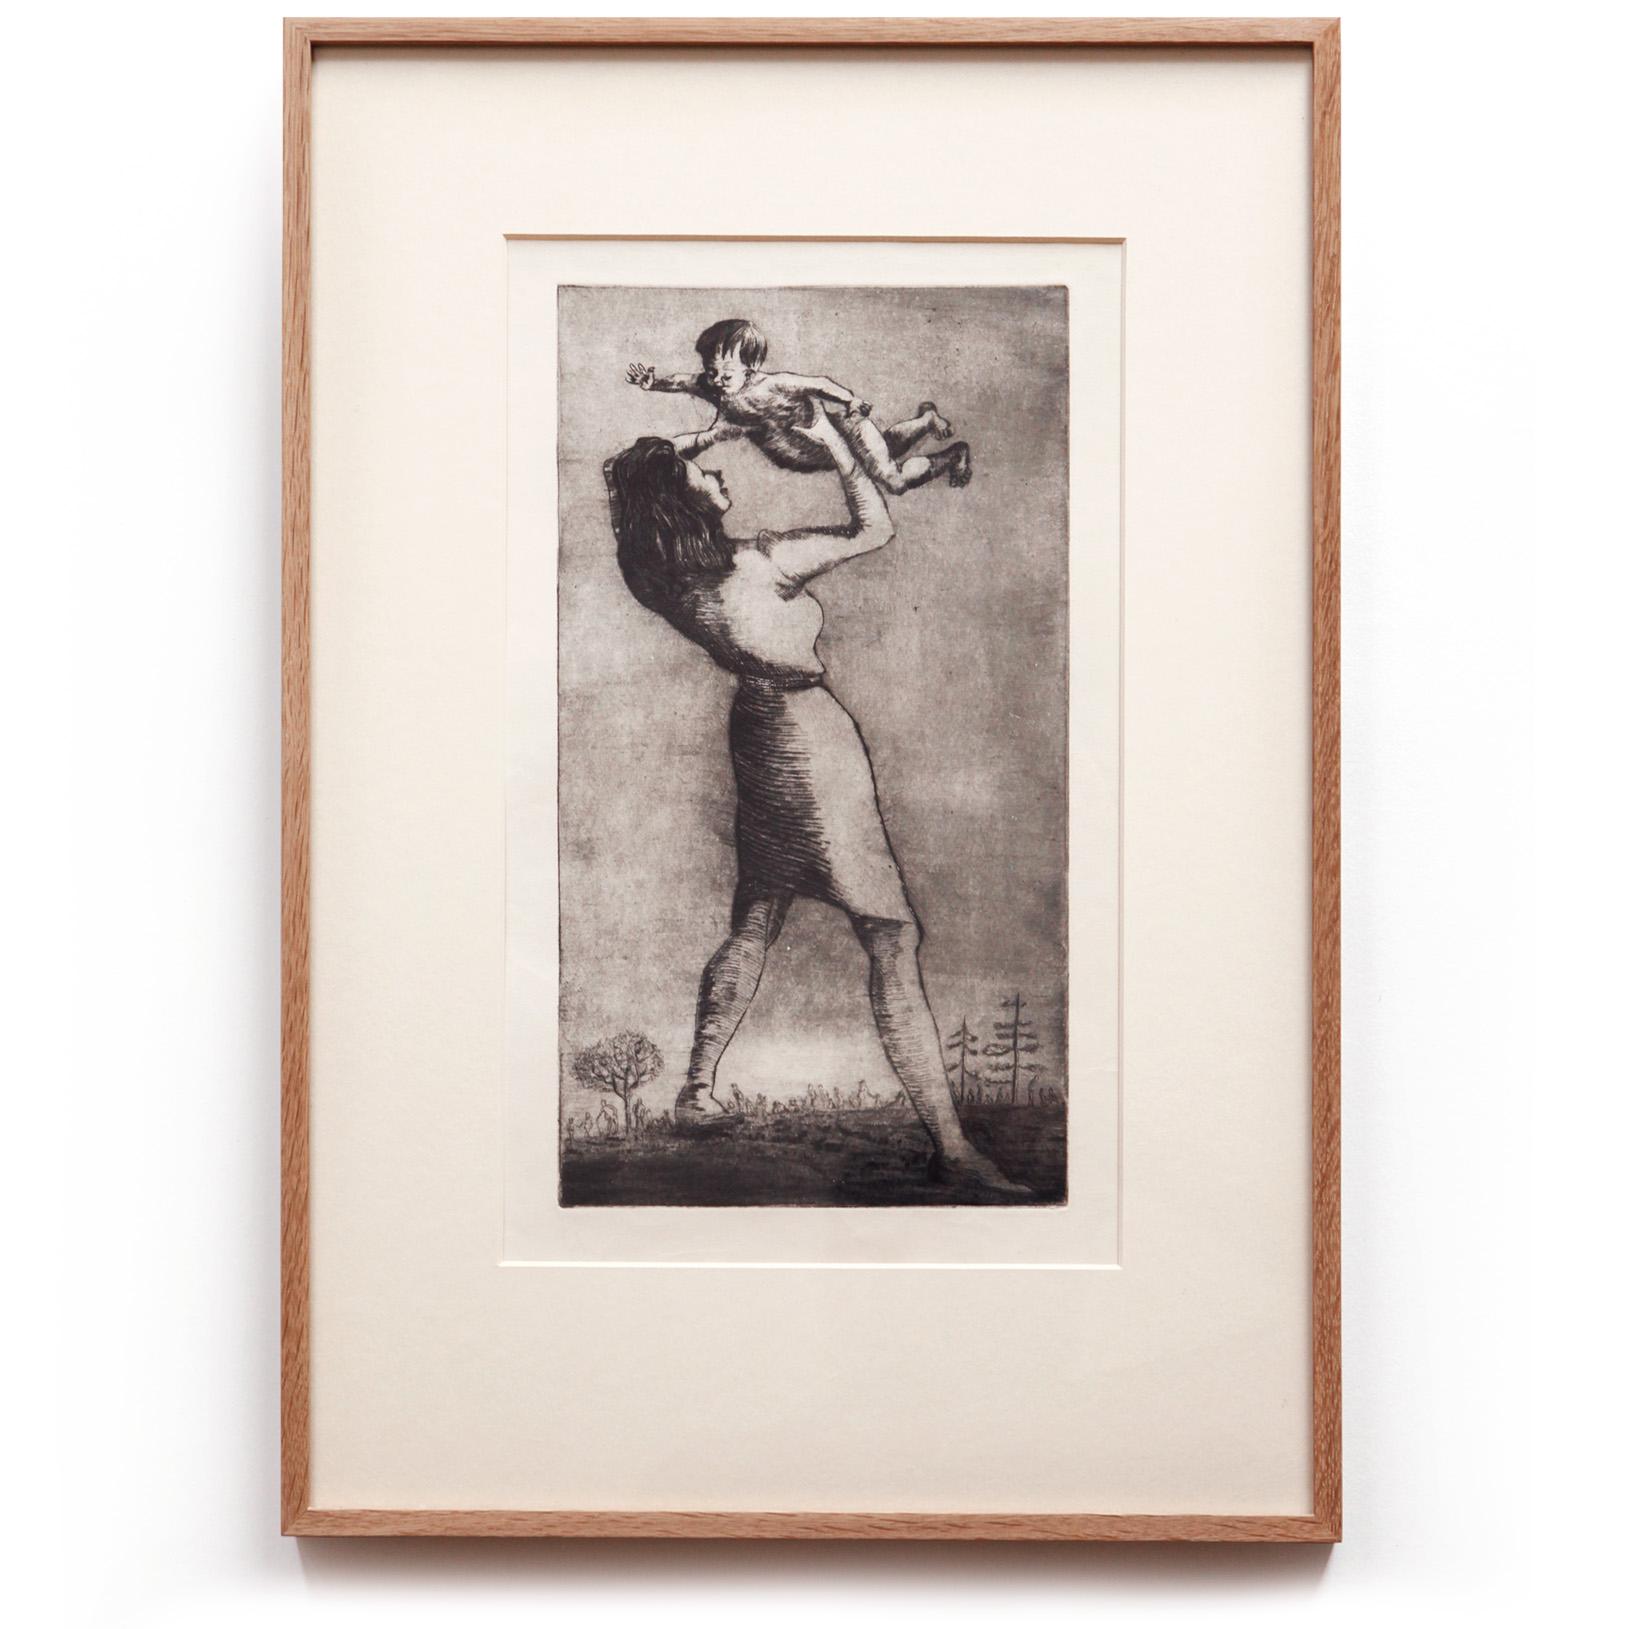 A beautiful and touching original Peter László Péri etching, 1940s. A beaming mother of gigantic proportions holds her child above her head. At her feet, a number of small characters also live their family lives. 

Artist: Peter László Péri
Date: